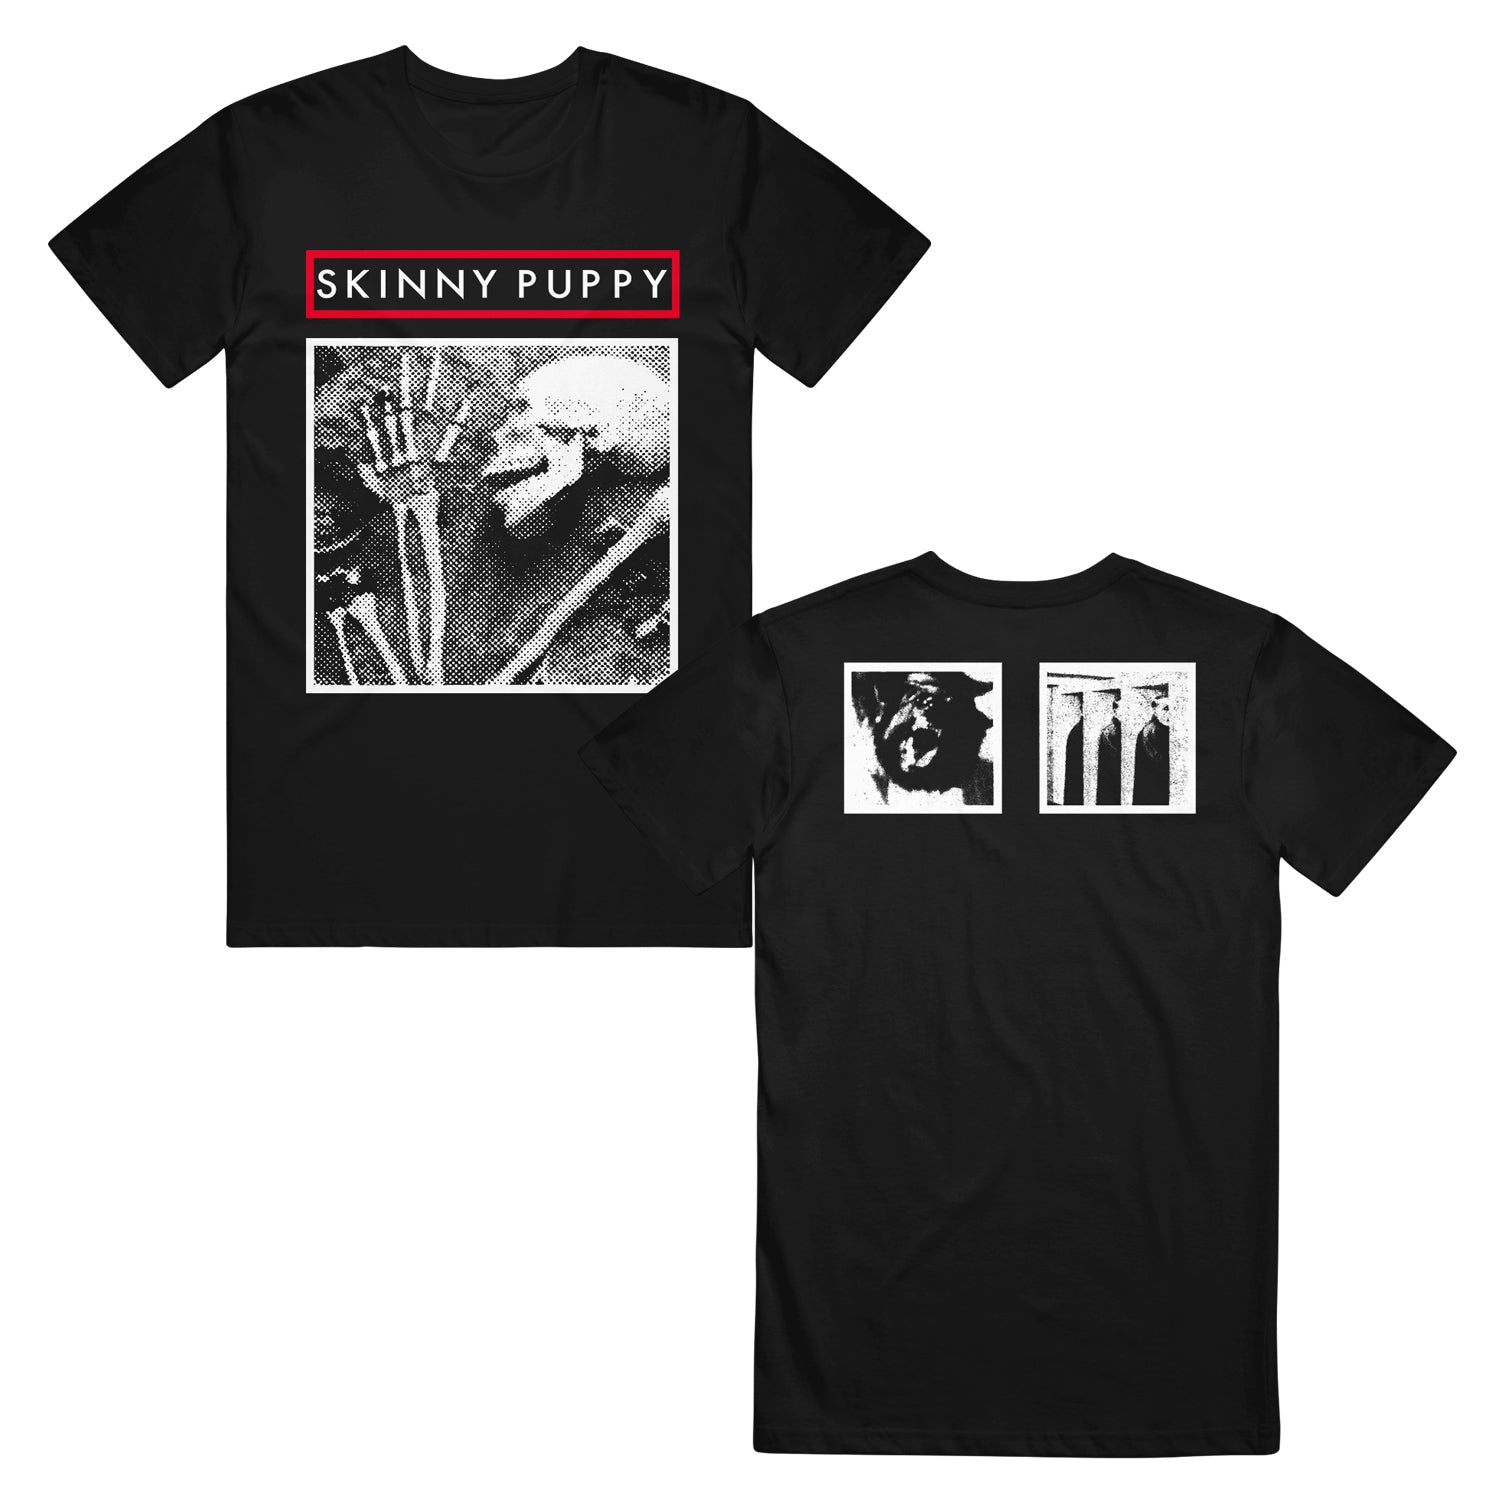 image of the front and back of a black tee shirt on a white background. front of the tee is on the left and has a black and white photo of a skeleton. at the top says skinny puppy inside a red rectangle. the back of the shirt is on the right and has two square black and white images of some kind of beast, and a man 